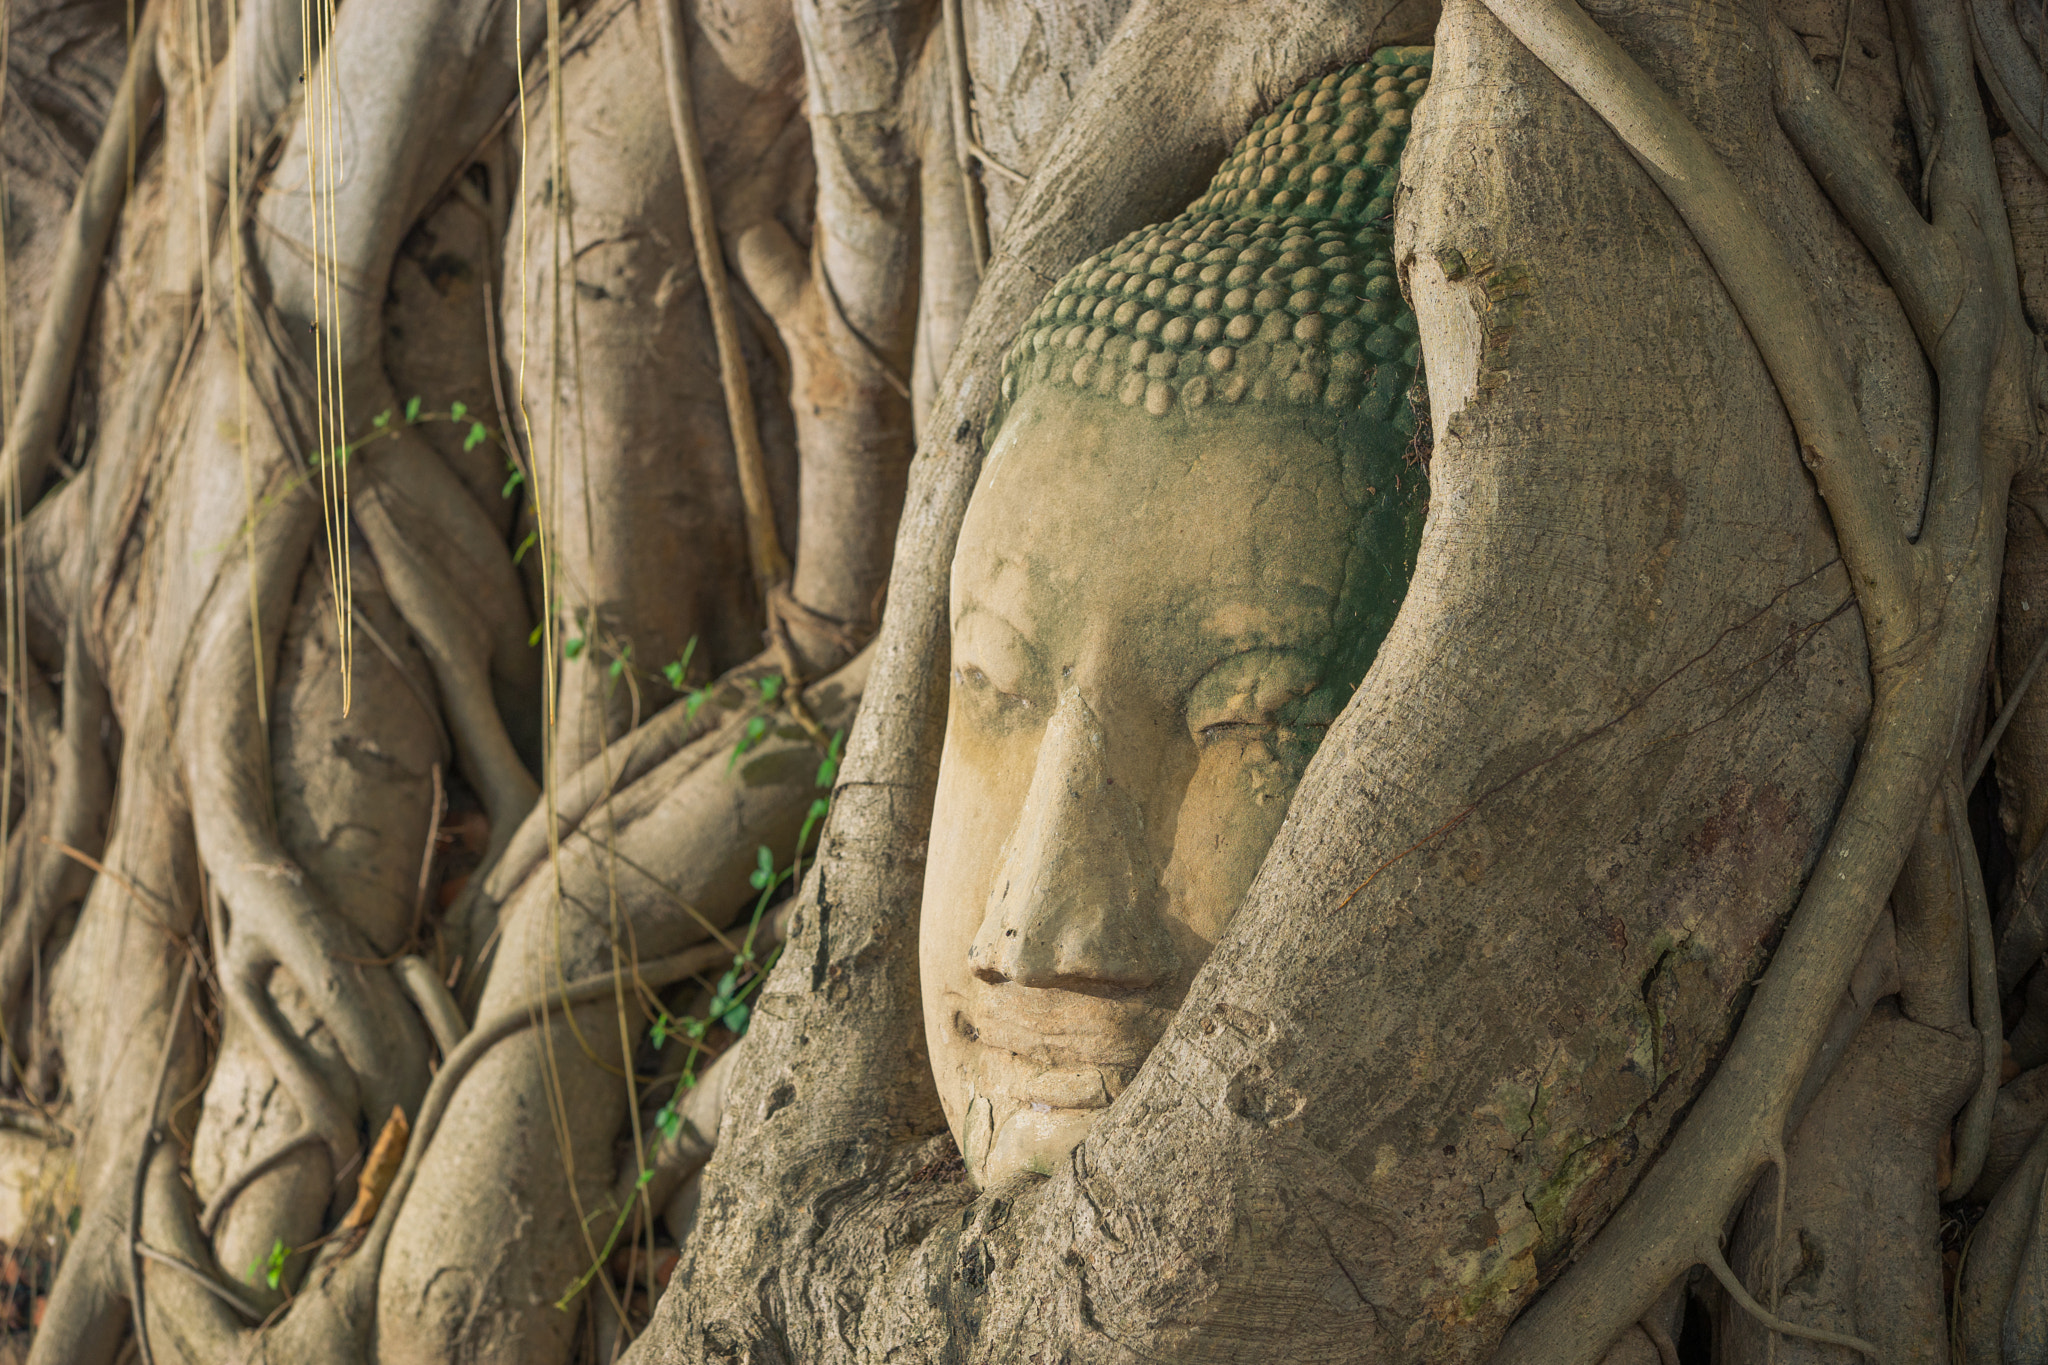 Sony a7 II sample photo. Buddha head looking off to the side embed in tree photography